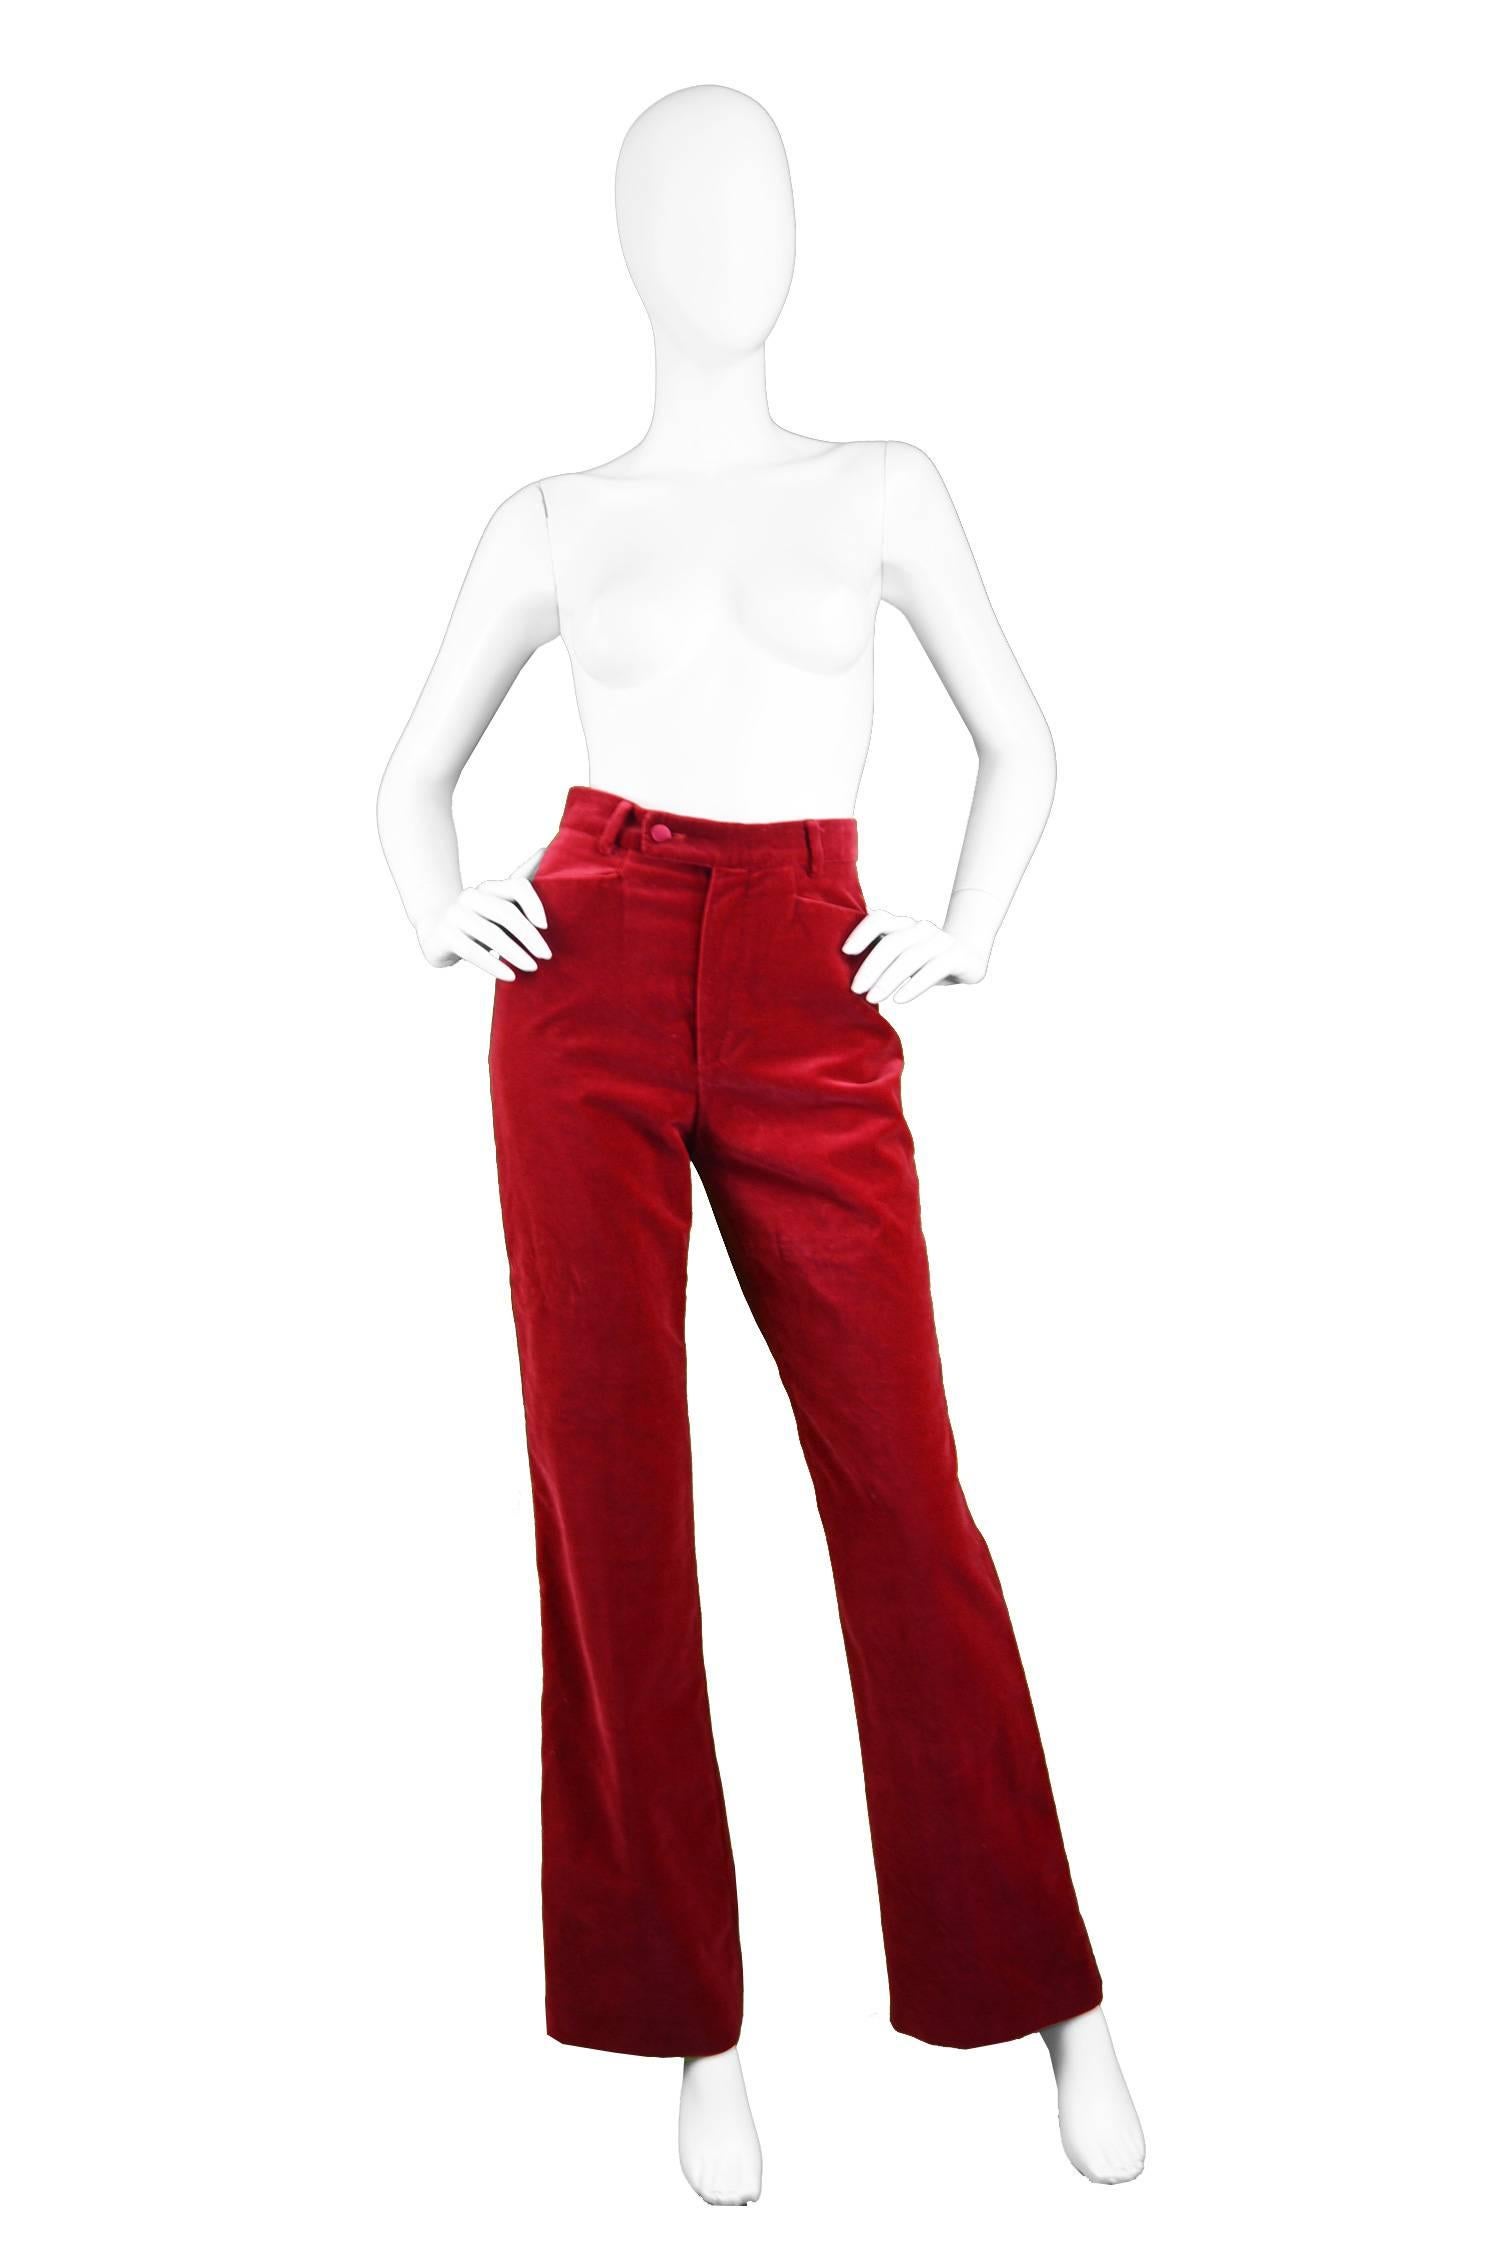 A pair of incredible vintage trousers from the 90s by Gucci during Tom Ford's period there. So sexy with a high waist in a luxurious red velvet with satin stripe down each leg and a subtle flare - giving a 1990s take on 1970s disco style. Perfect